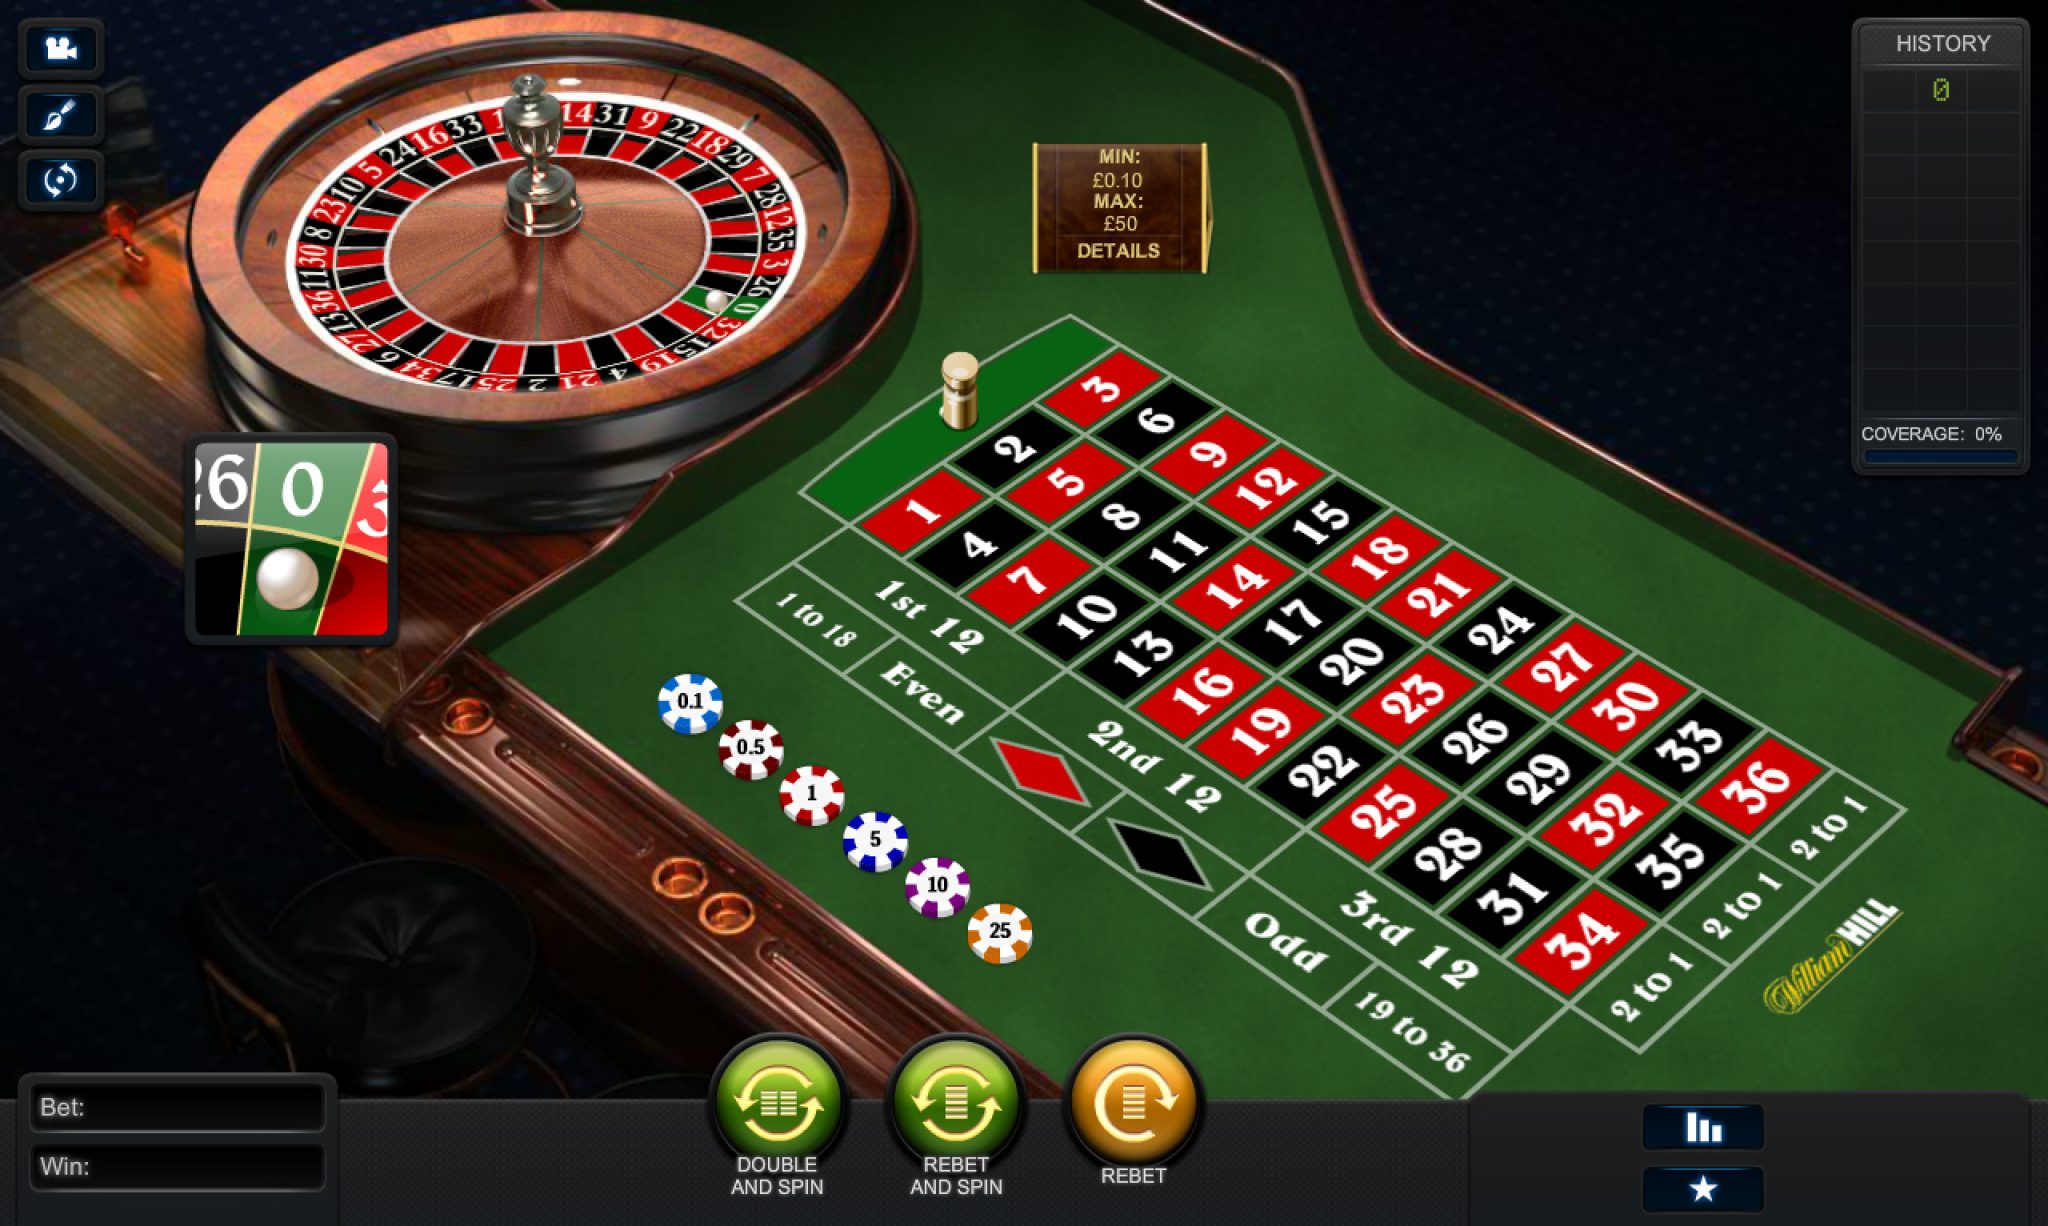 Roulette Online Free Gaming